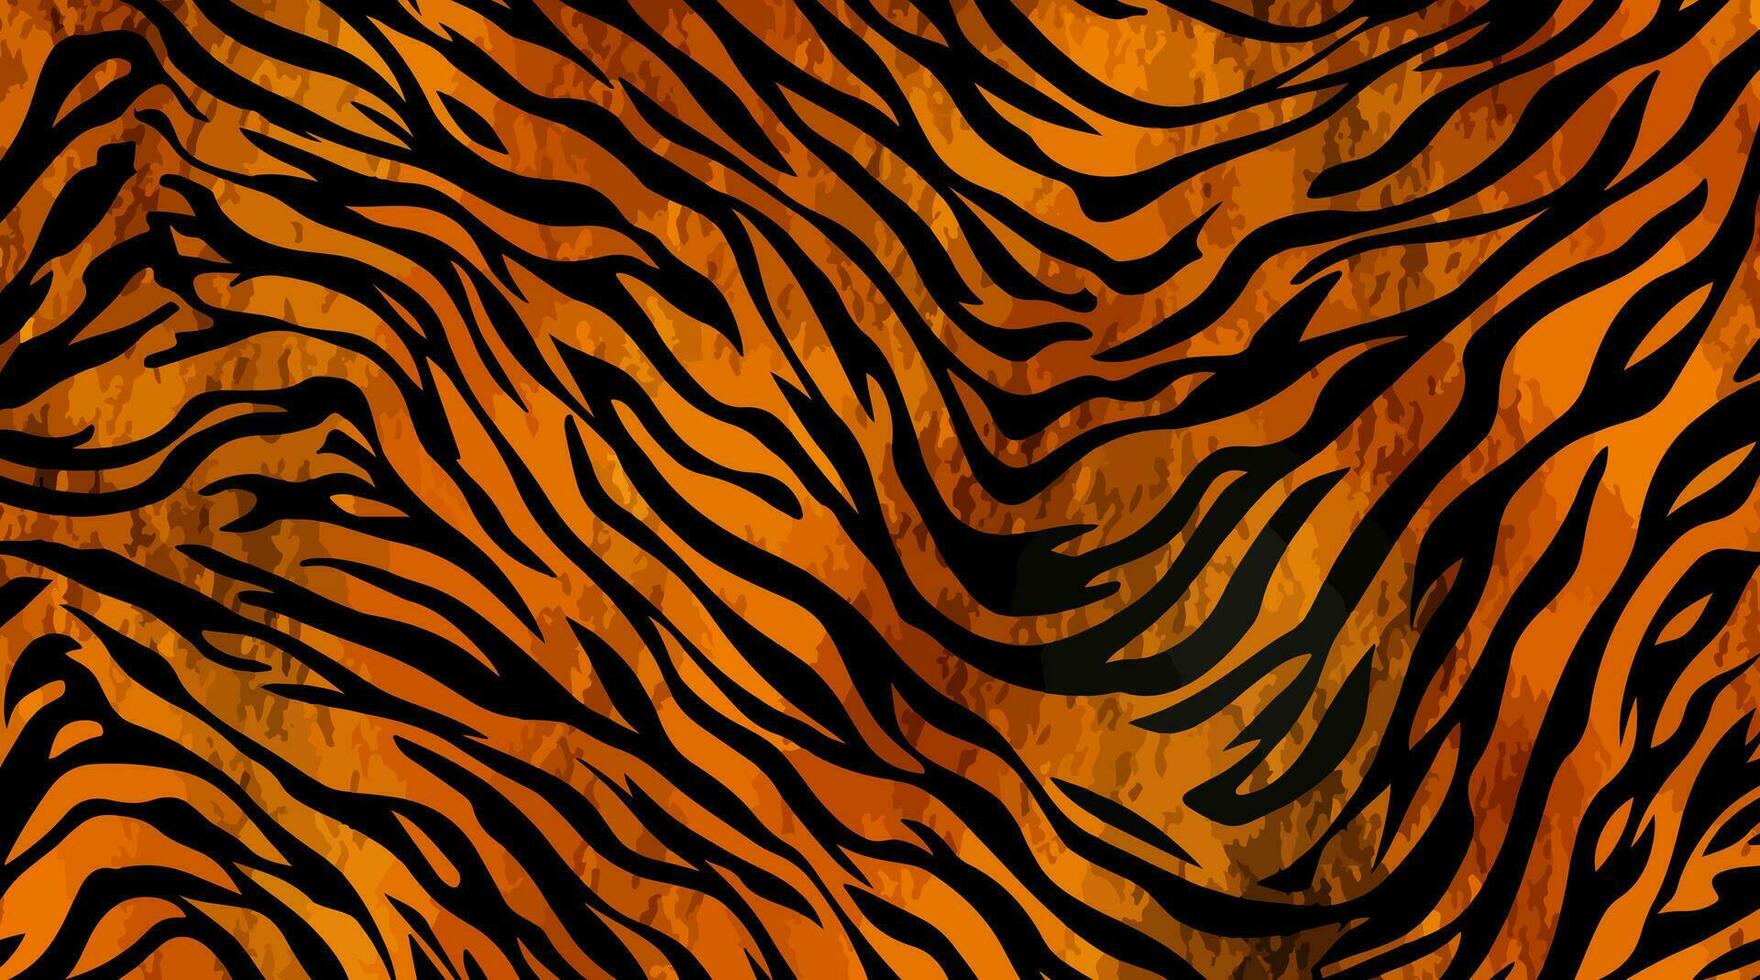 Tiger pattern texture, Tiger vector, Tiger fur texture Luxury Decorative Textile Patterns for famous banners. Designed for use in wallpaper, curtain,carpet,clothing,Batik,illustration,Embroidery style vector